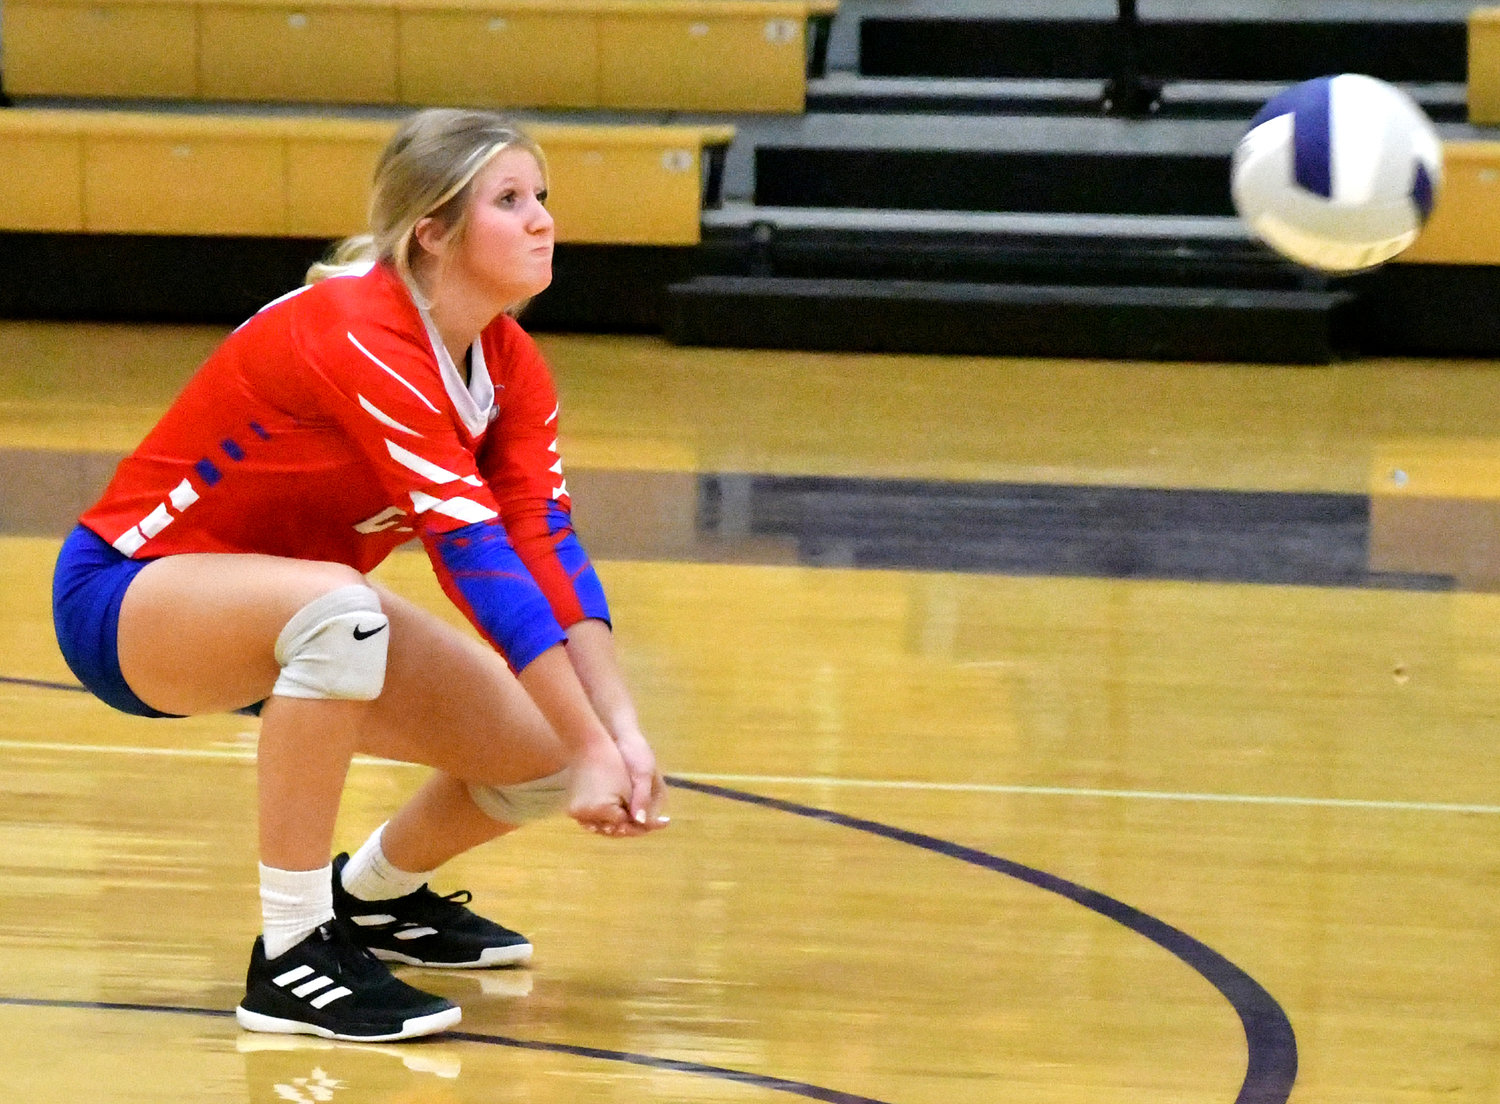 Parker Wales (27) keeps her eye on the ball during a return by the Lady Rockets.